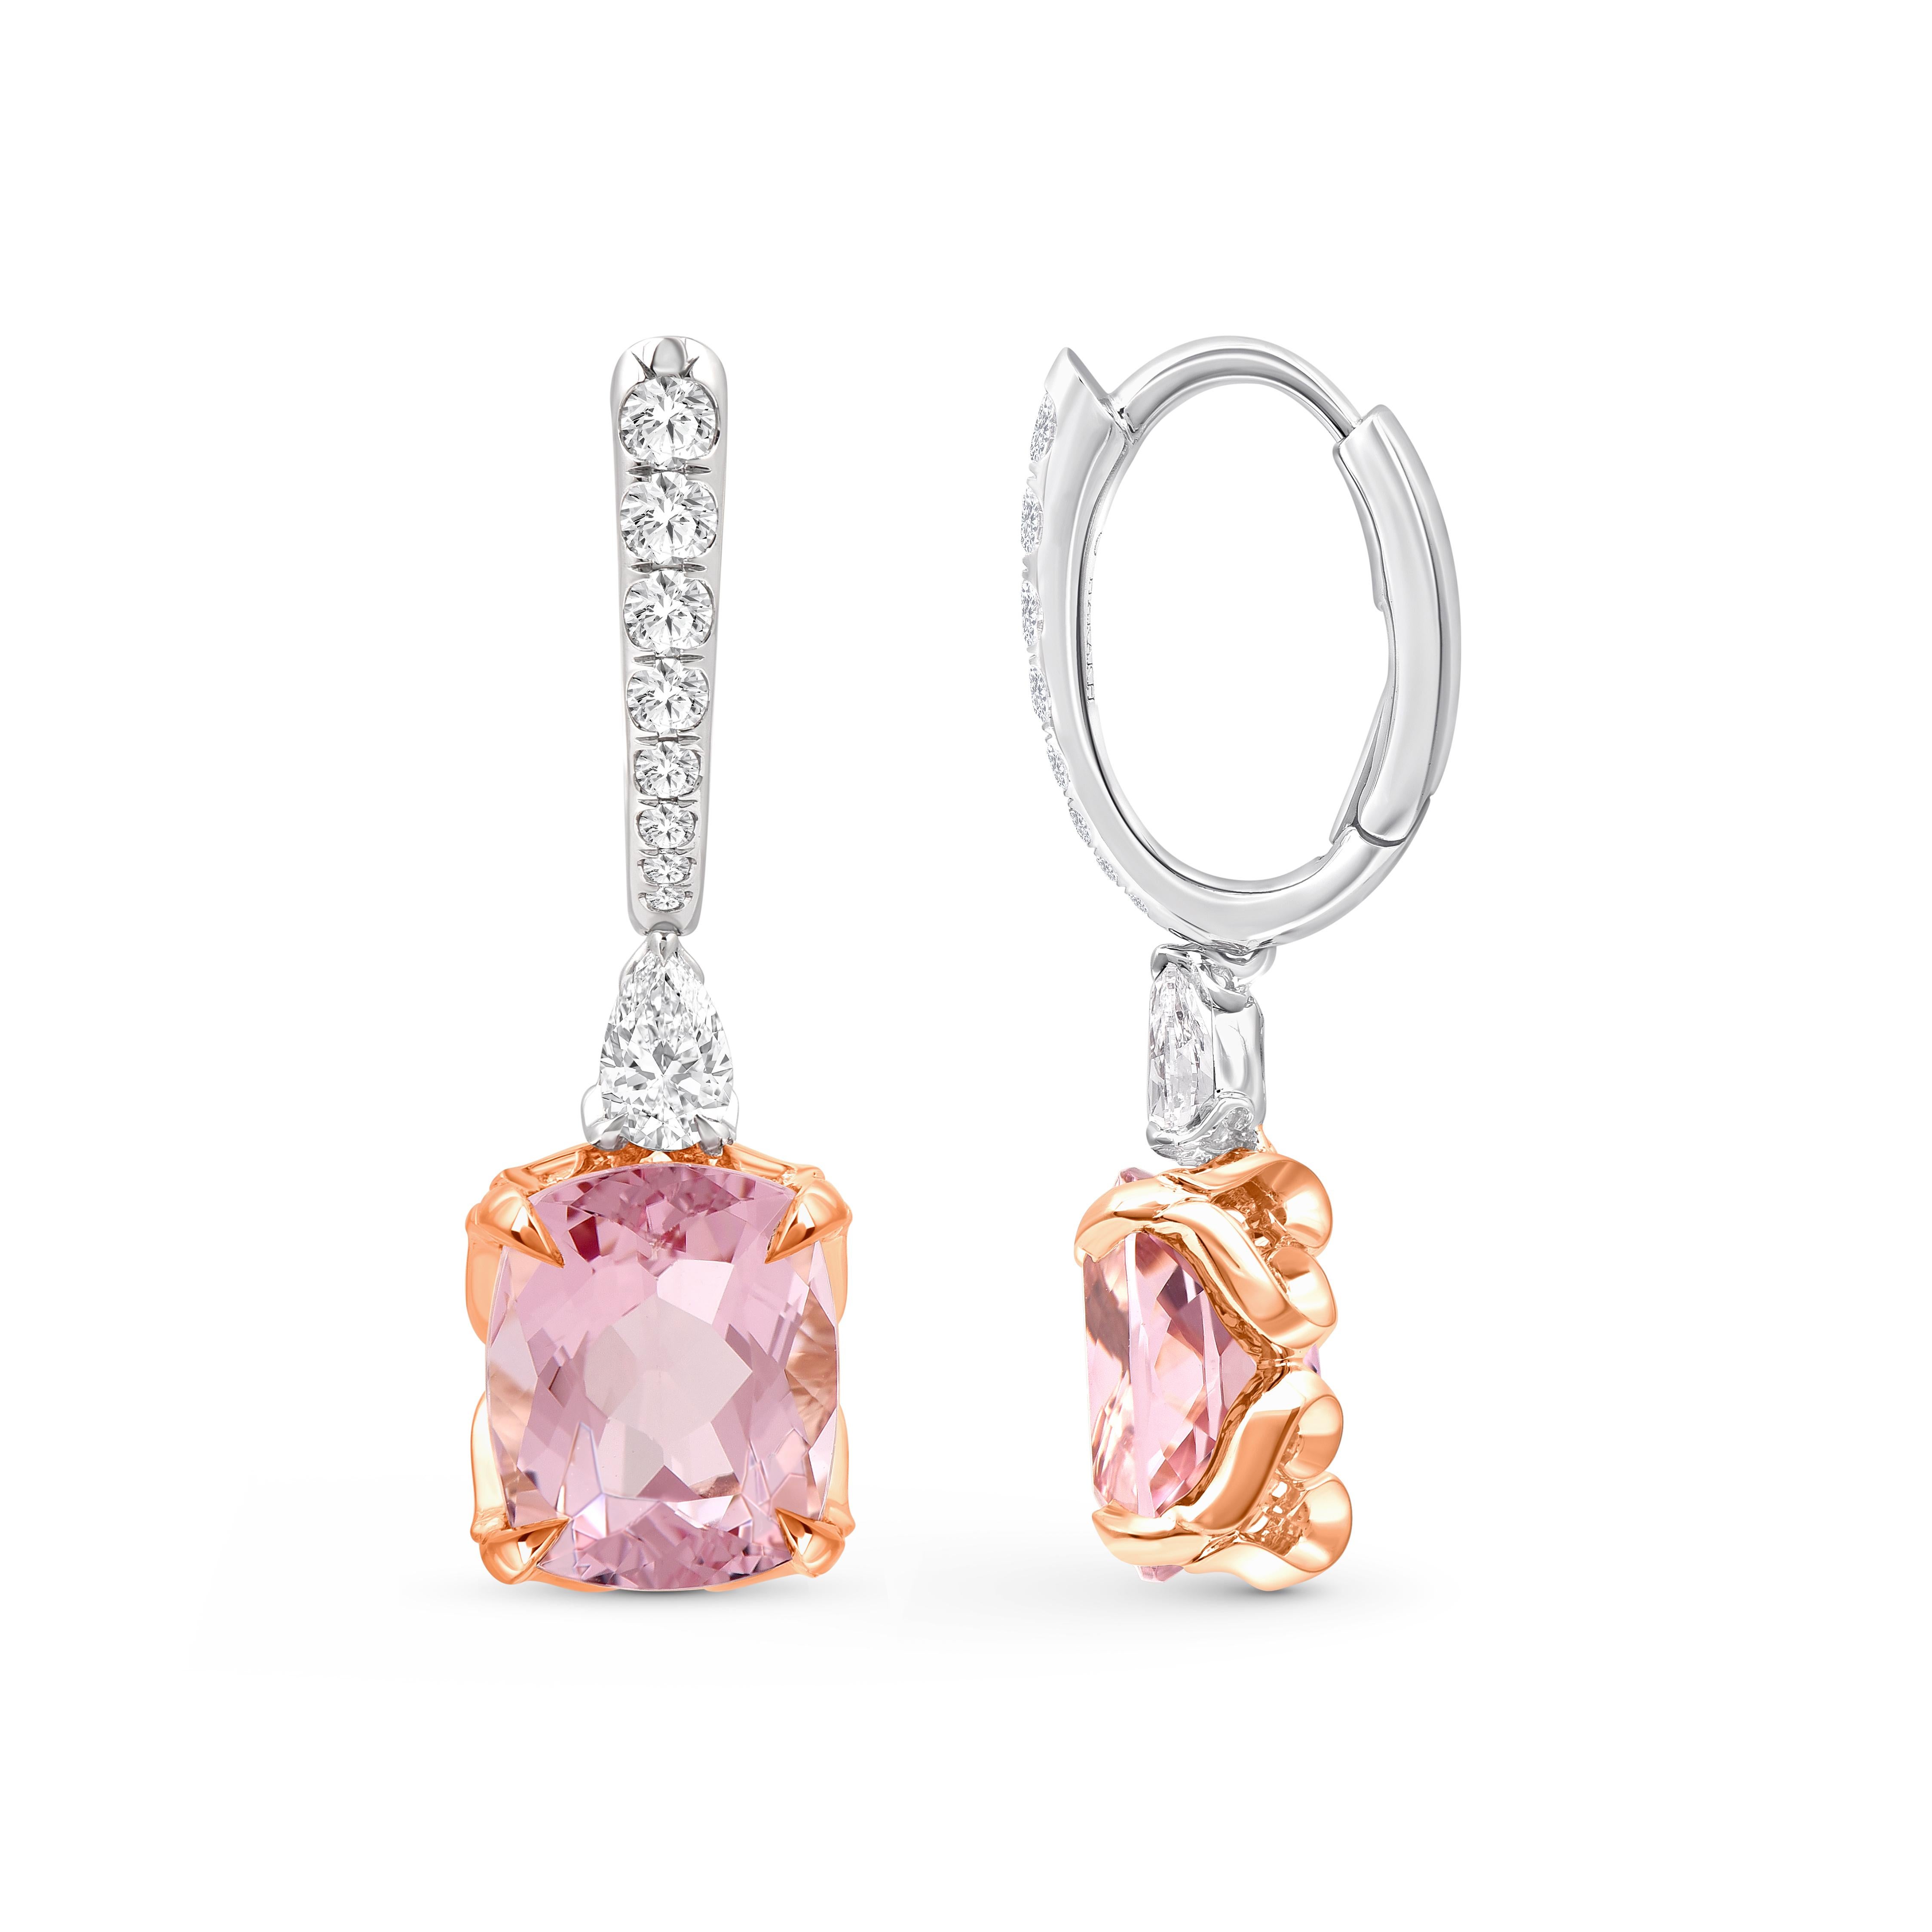 Contemporary HARAKH 1/2 Carat Brilliant Cut Colorless Diamond and Morganite Earrings For Sale